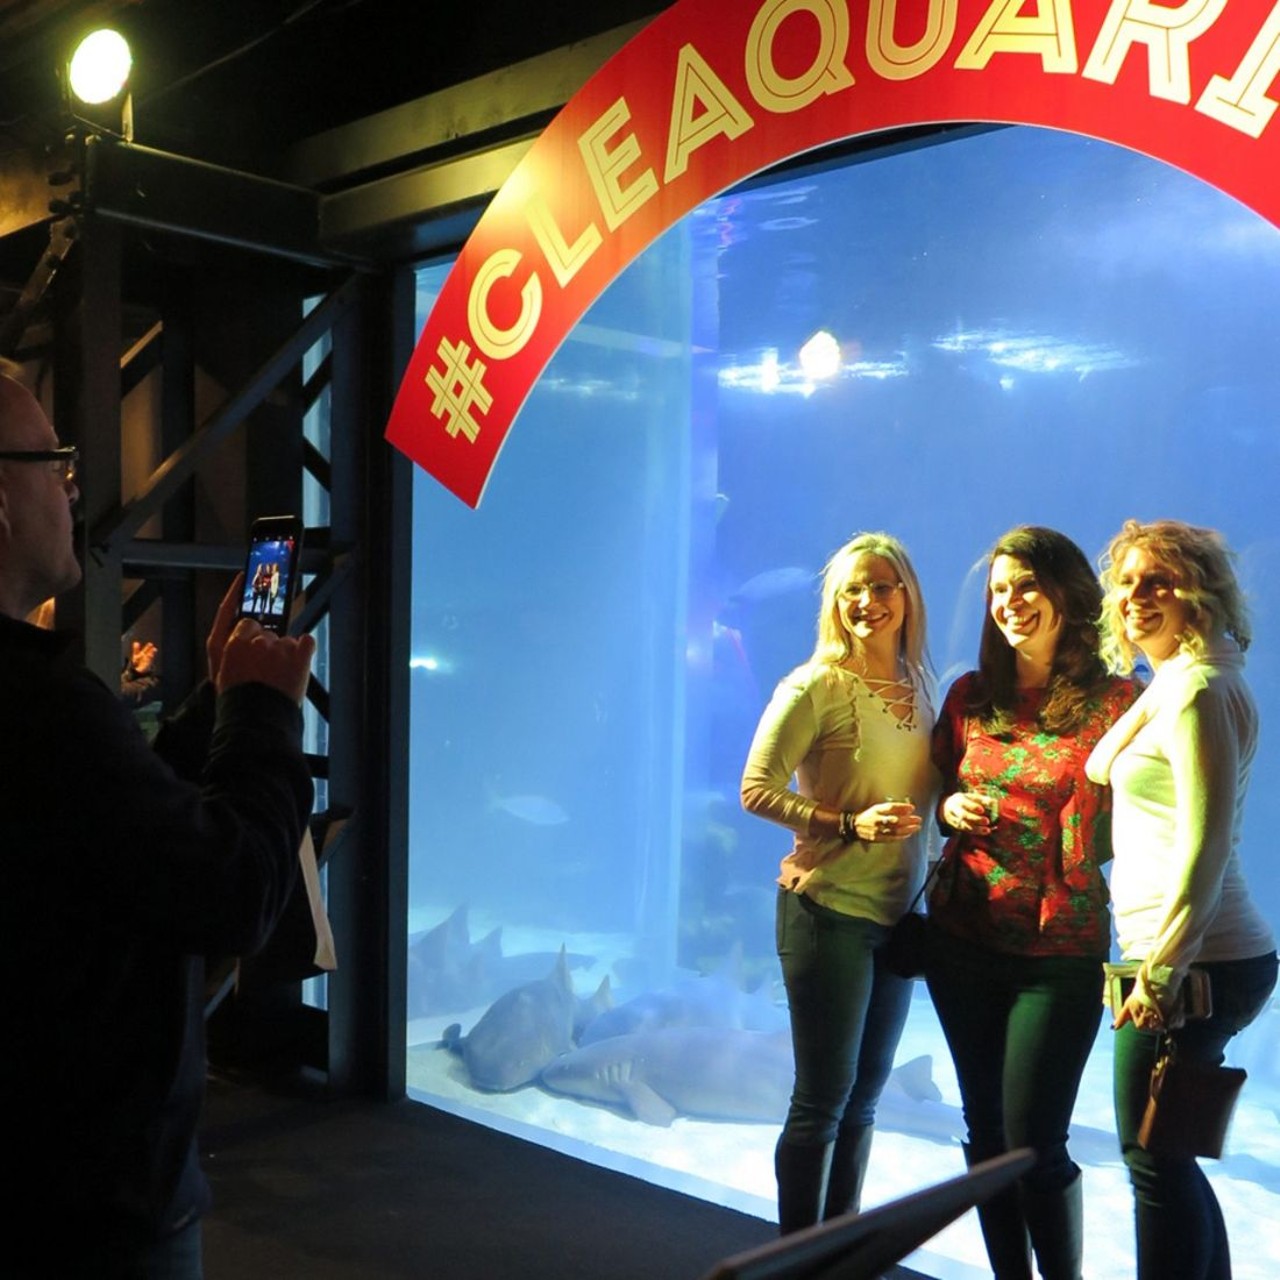 Girls Night Out at Greater Cleveland Aquarium
Thu, July 12
Photo Provided